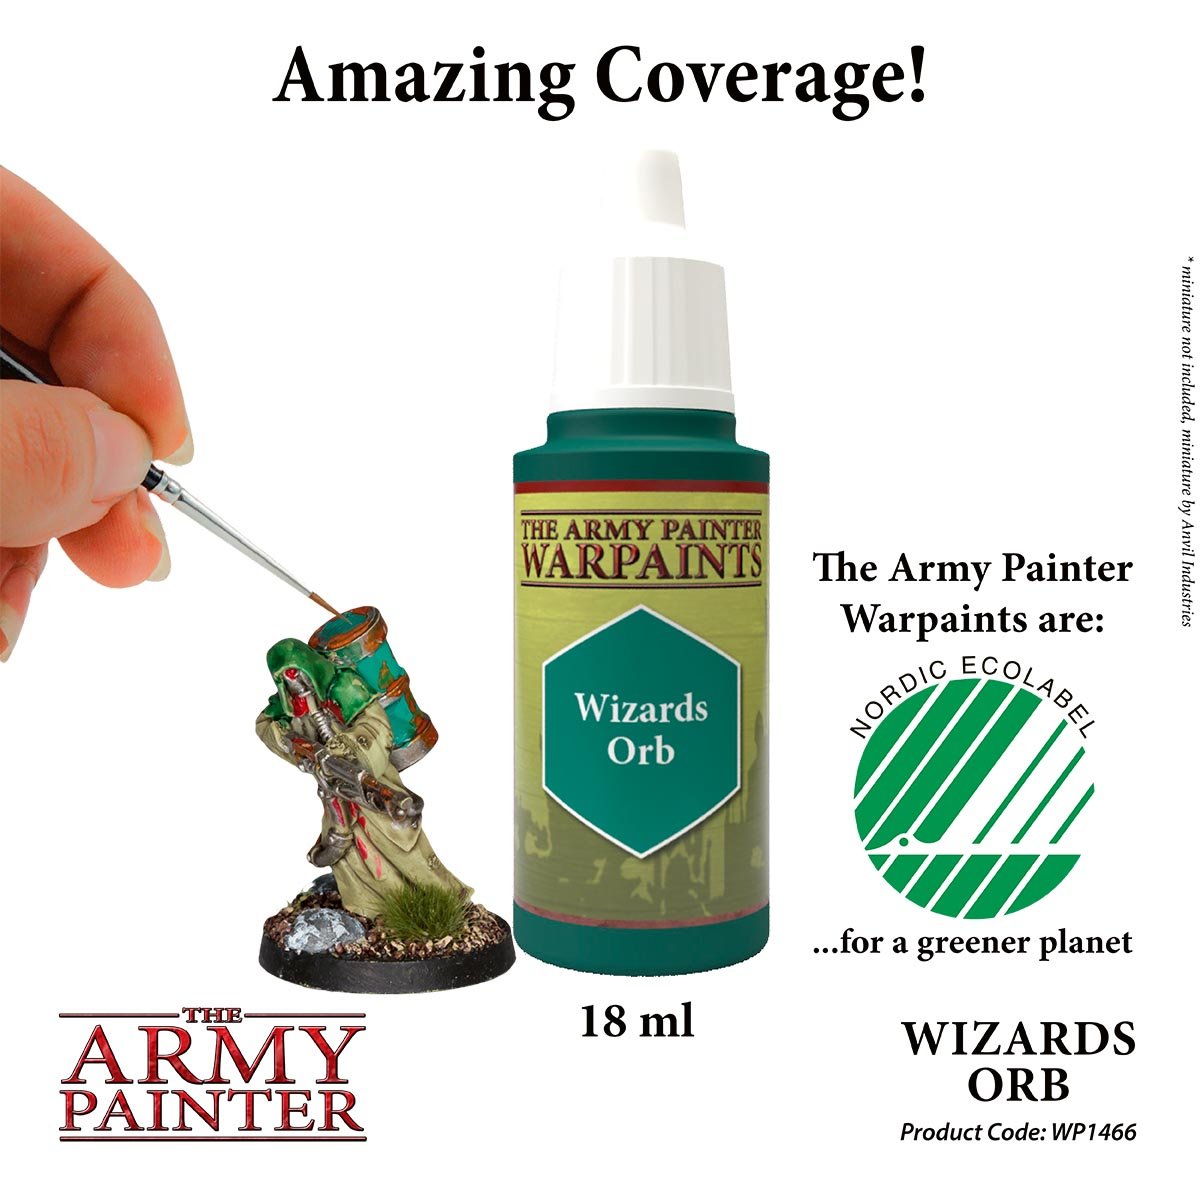 The Army Painter Warpaints WP1466 Wizards Orb Acrylic Paint 18ml bottle